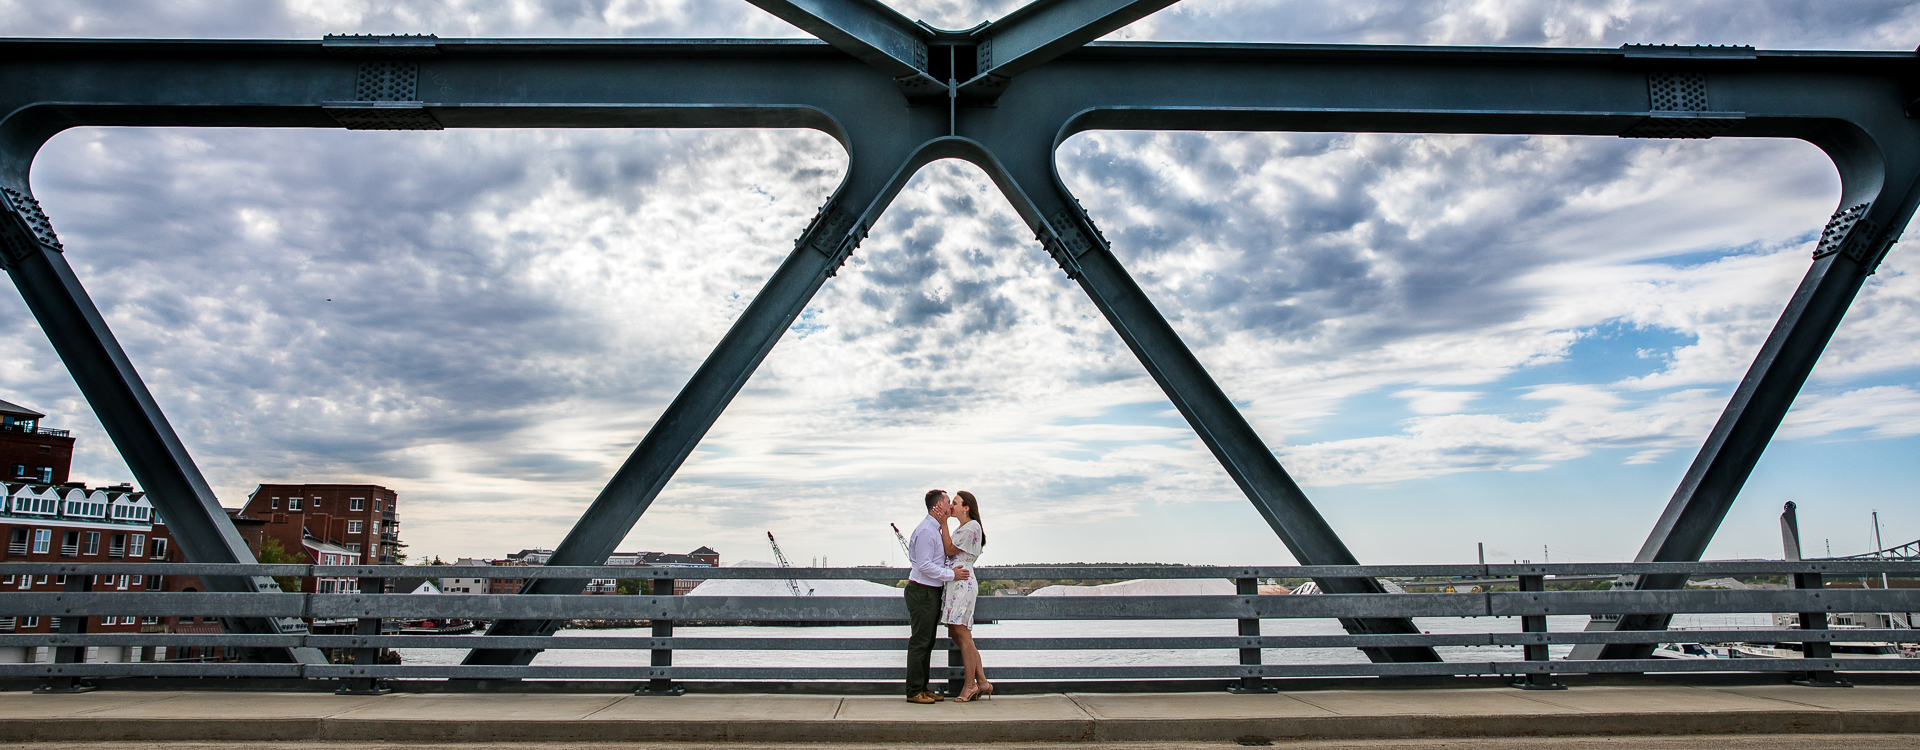 Memorial Bridge -- Portsmouth NH Engagement Session by Lee Germeroth Photography